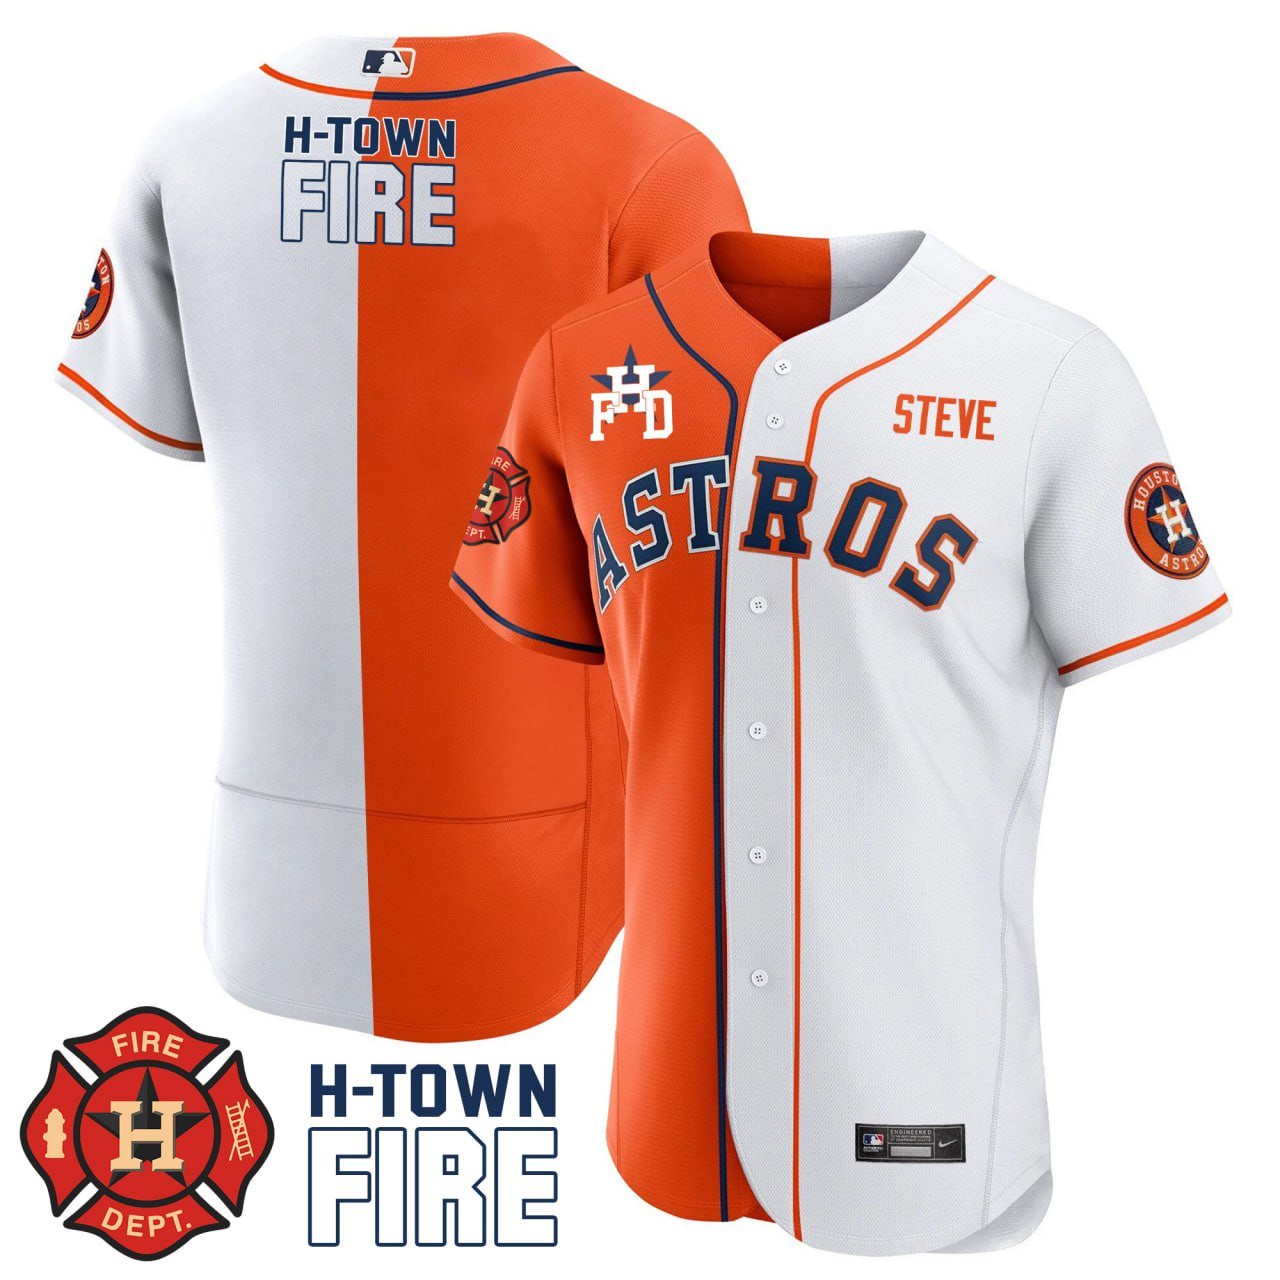 Women's Astros Mexico Baseball Limited Jersey - All Stitched - Nebgift